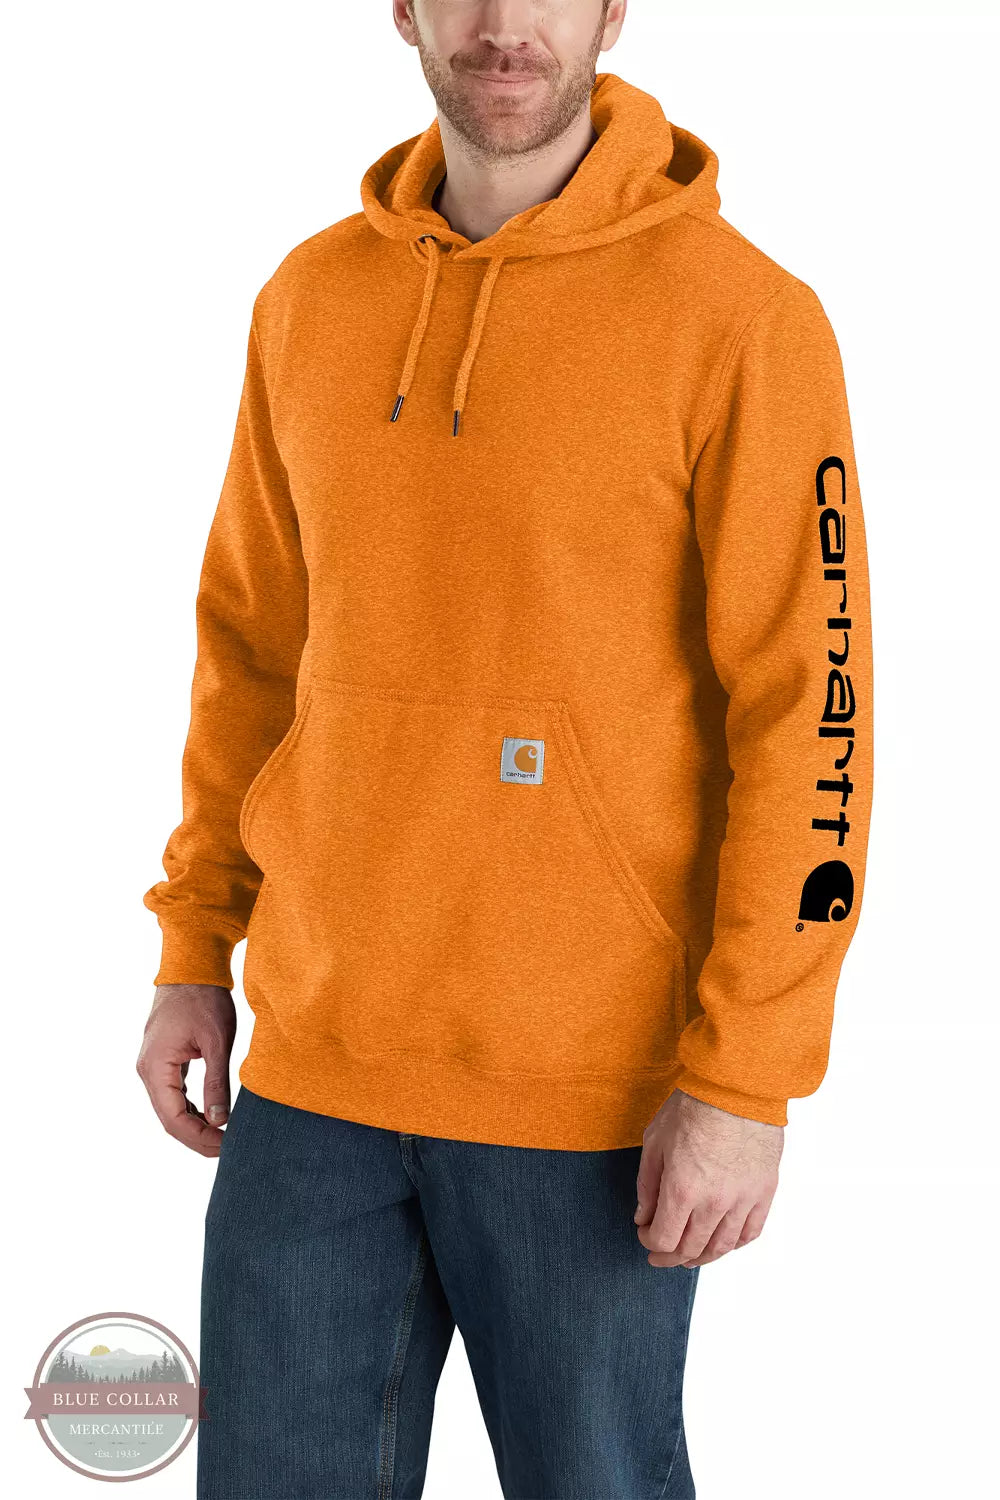 Carhartt K288 Loose Fit Midweight Logo Sleeve Hoodie Fall Season Marmalade Heather Front View